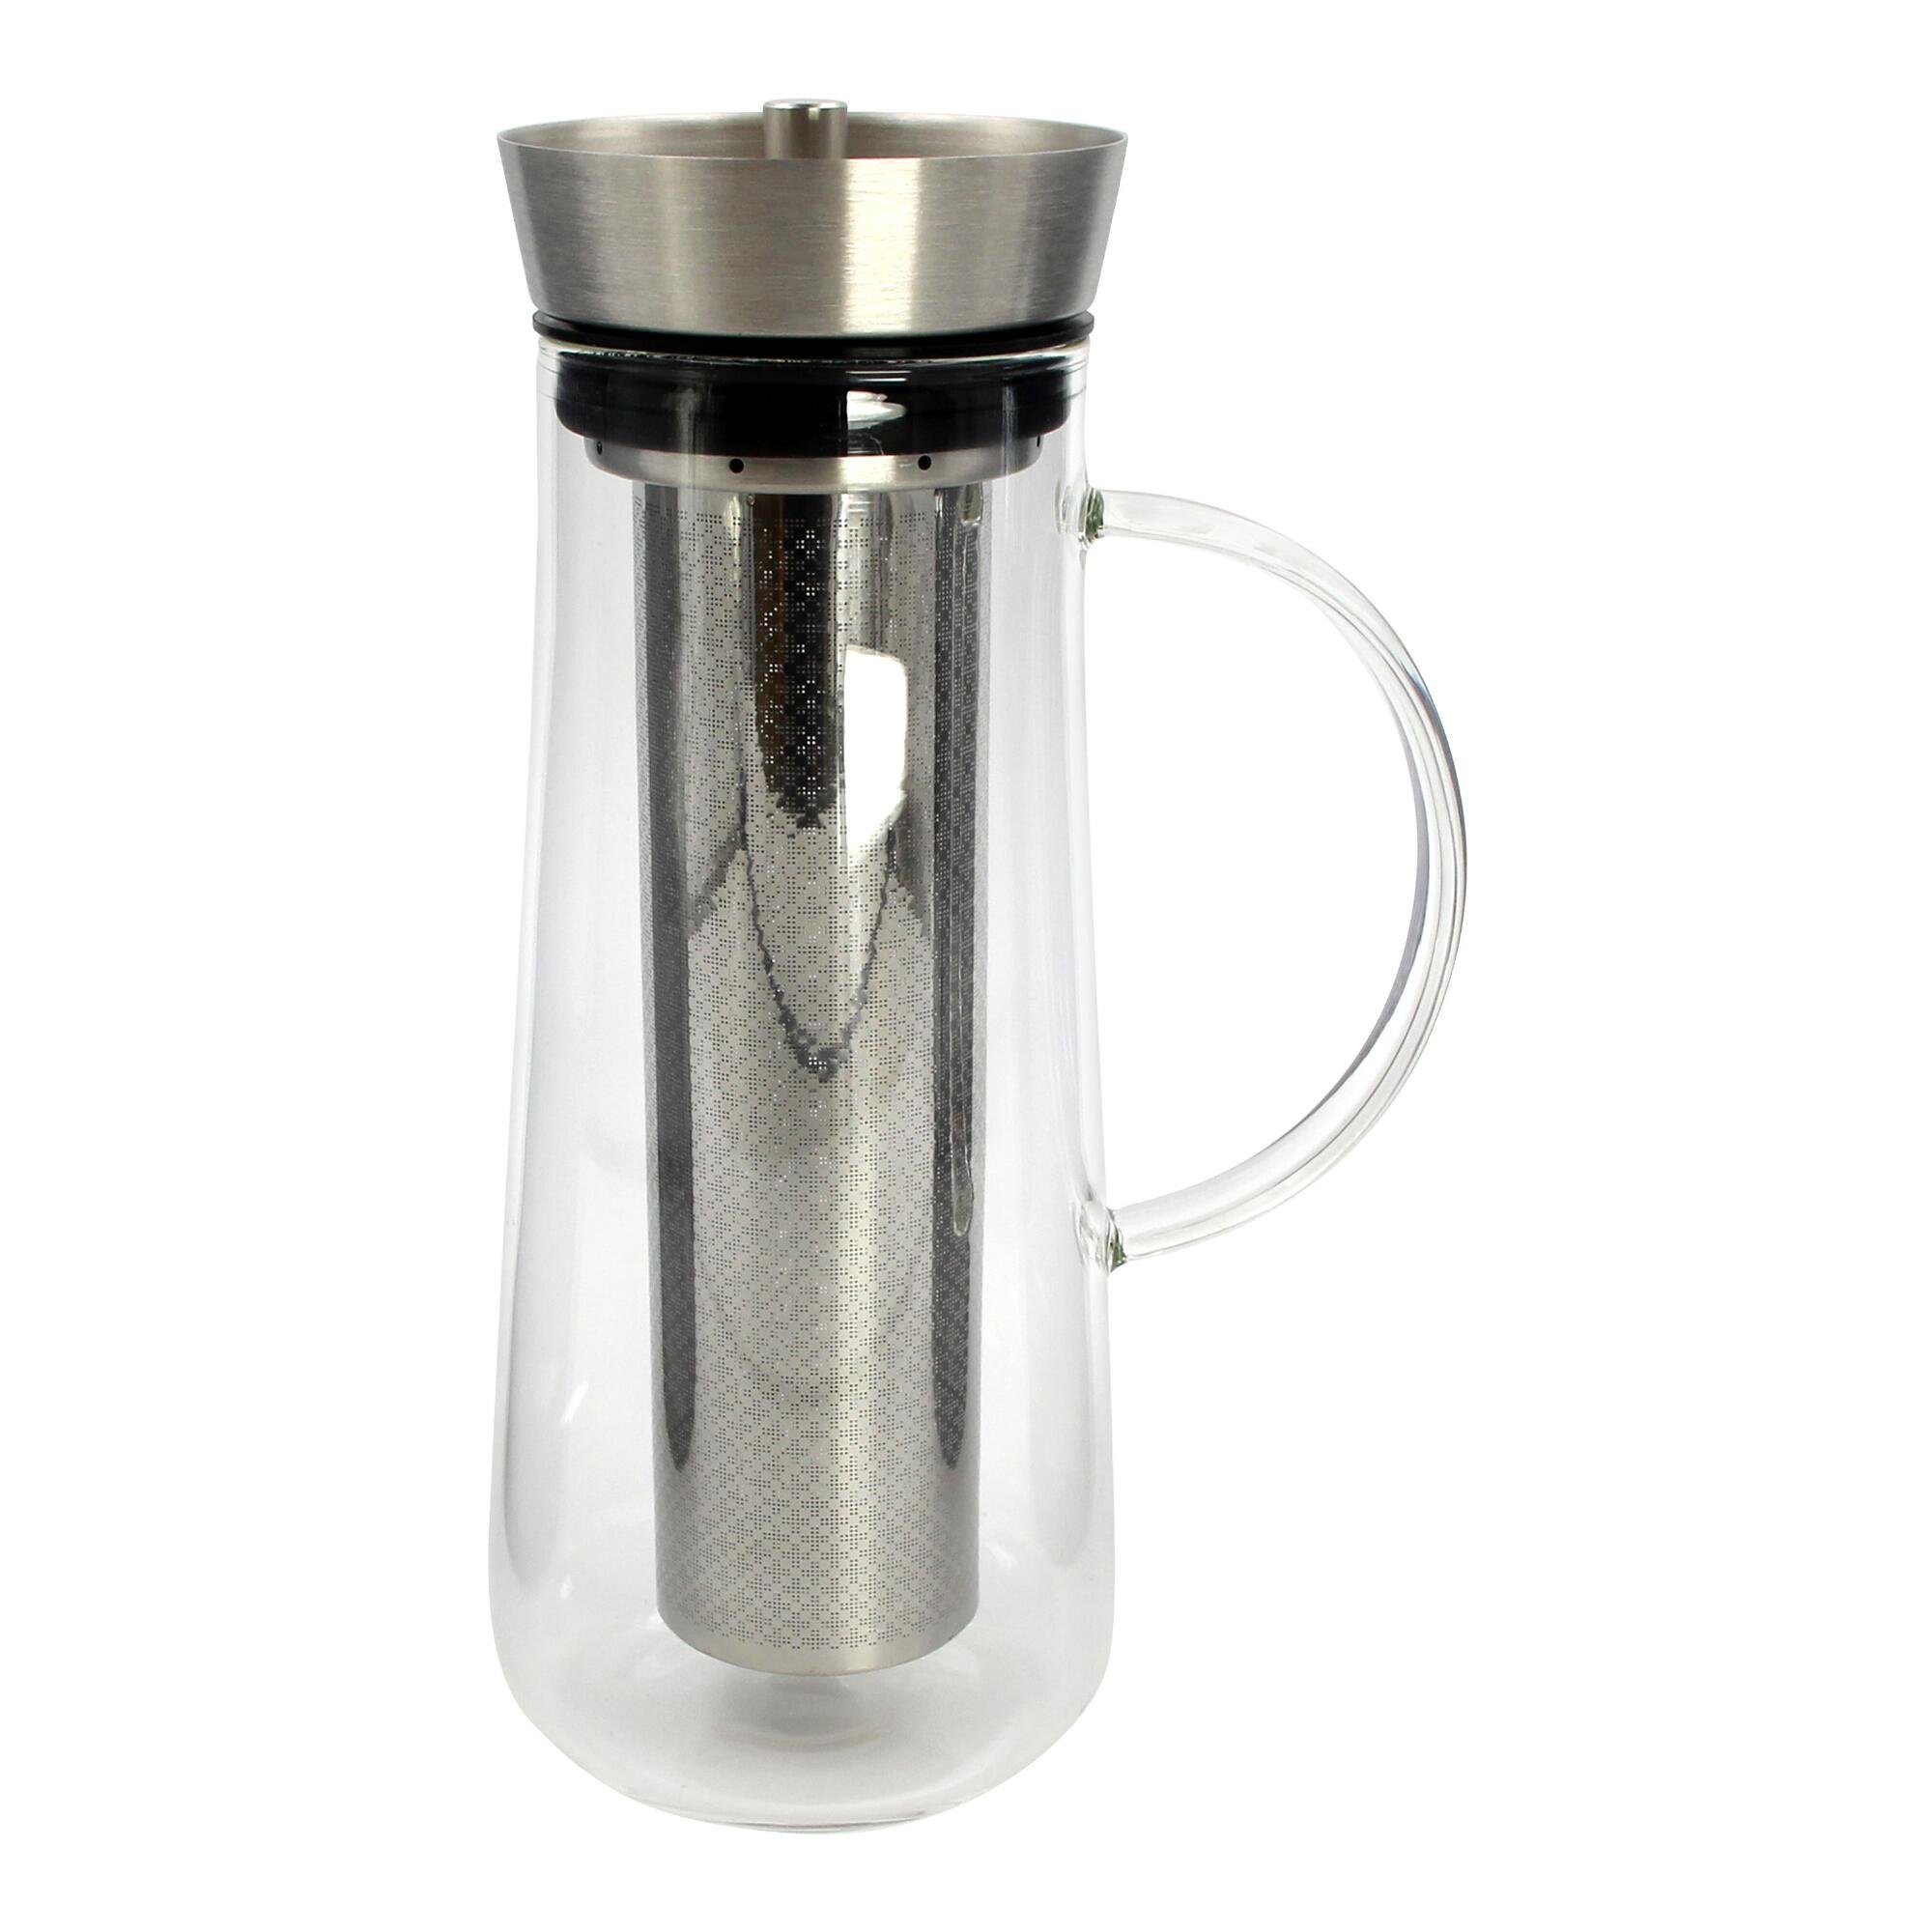 41 Best Coffee Accessories To Make The Perfect Cup Every Time